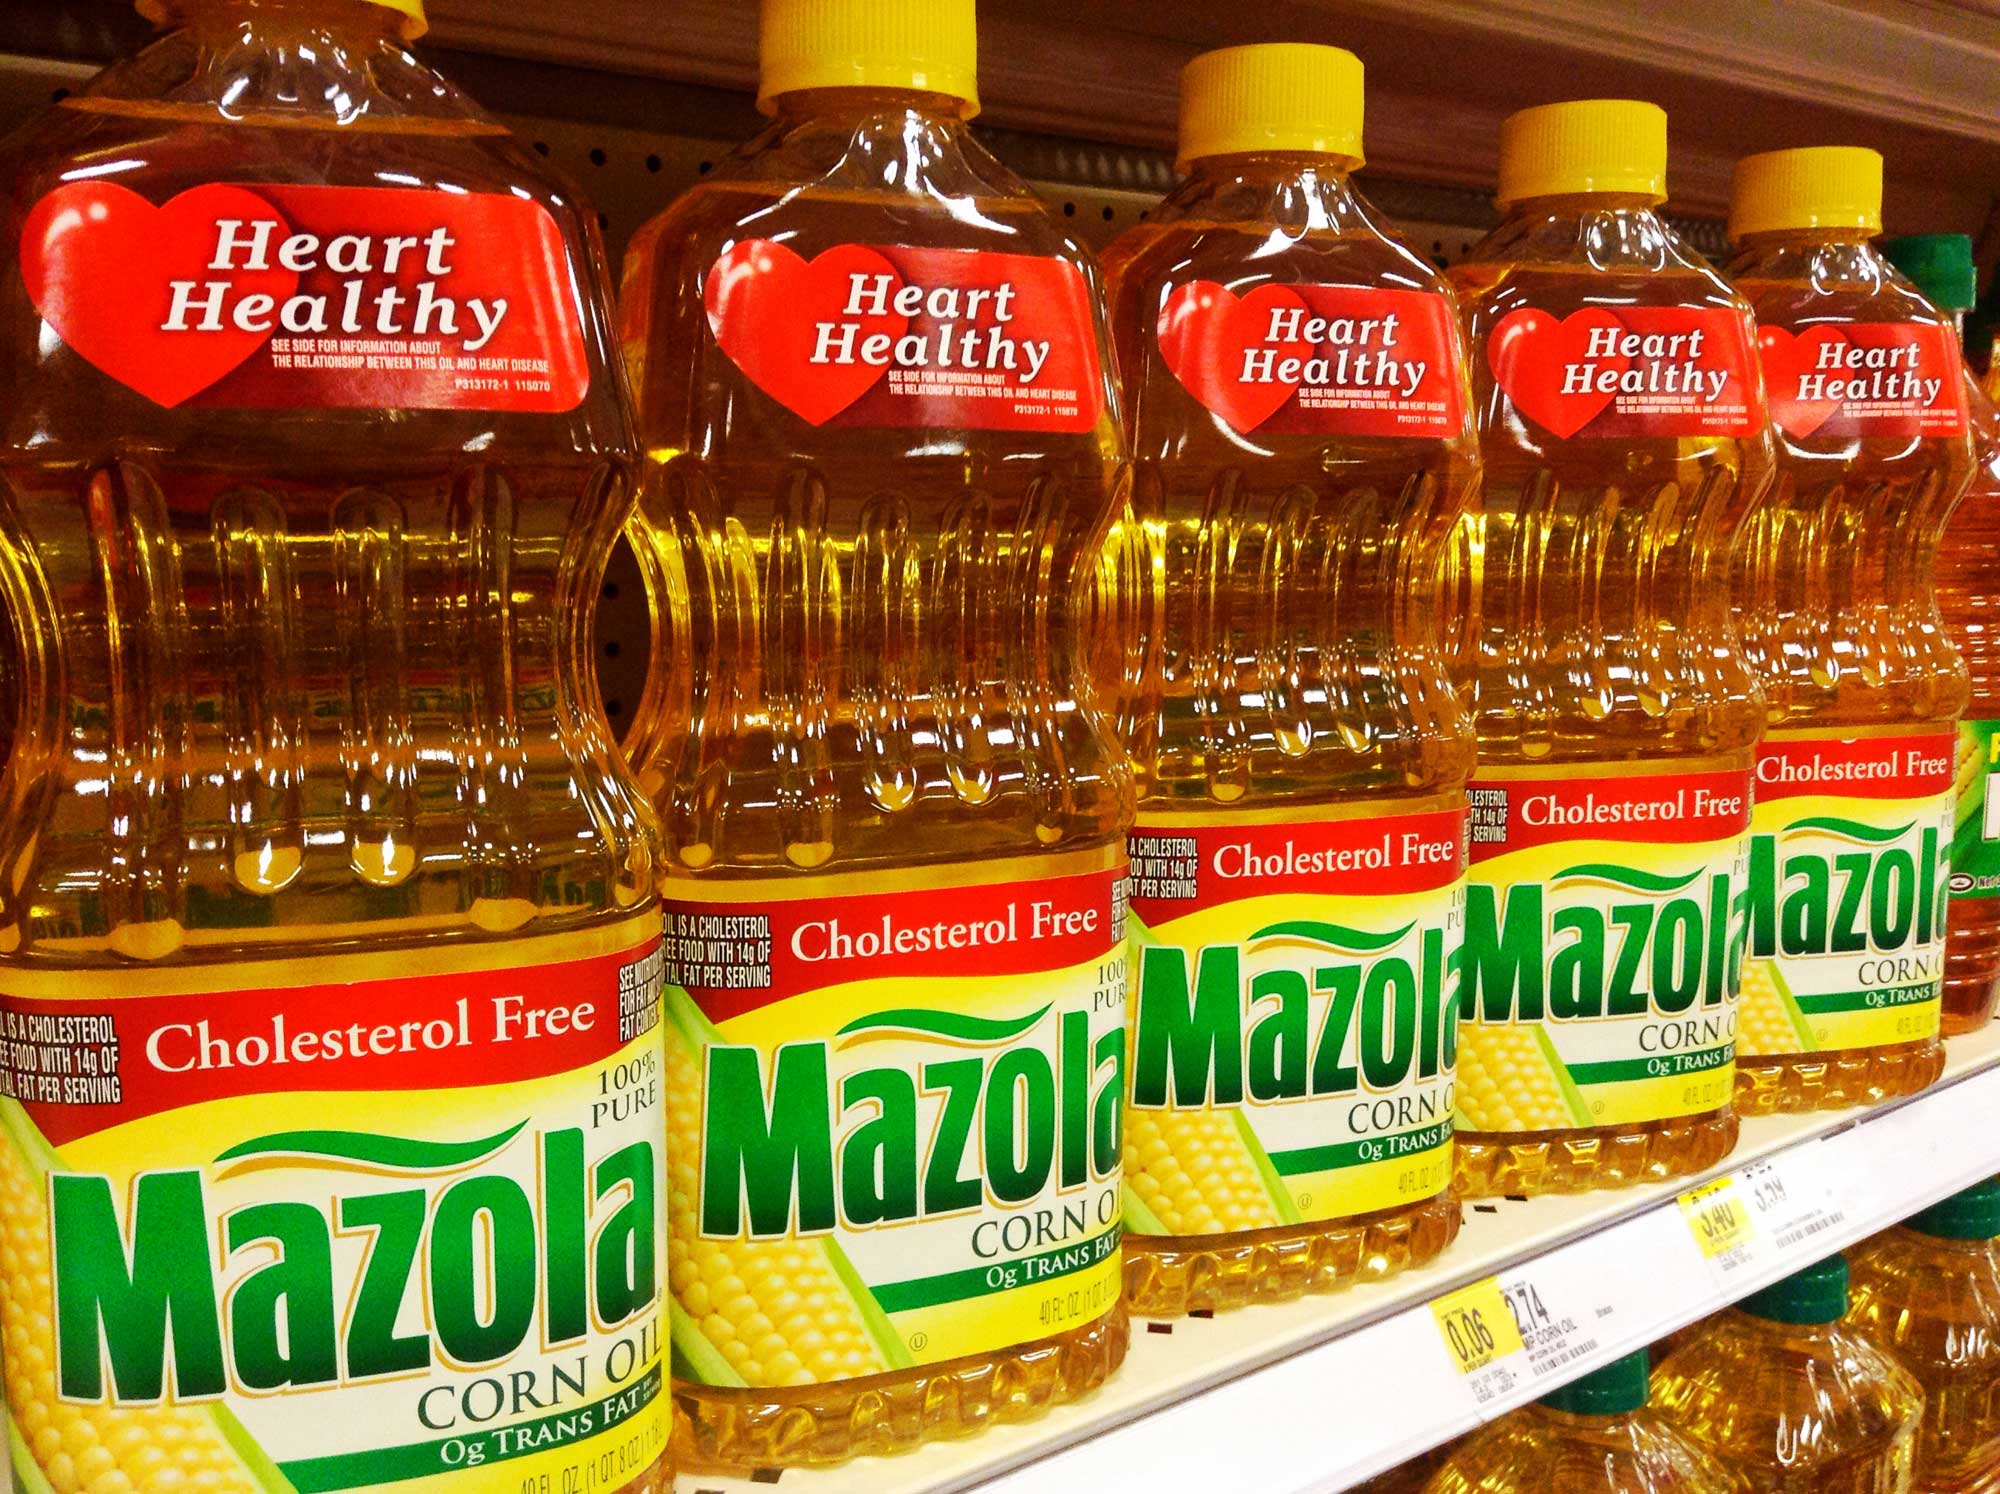 Photograph of bottle of corn oil on a shelf in a store. The photo shows a row of Mazola brand corn oil in clear plastic bottles with yellow and green labels. Each bottle has a red label that says "Heart Healthy" and a red banner on the brand label that says "Cholesterol Free."